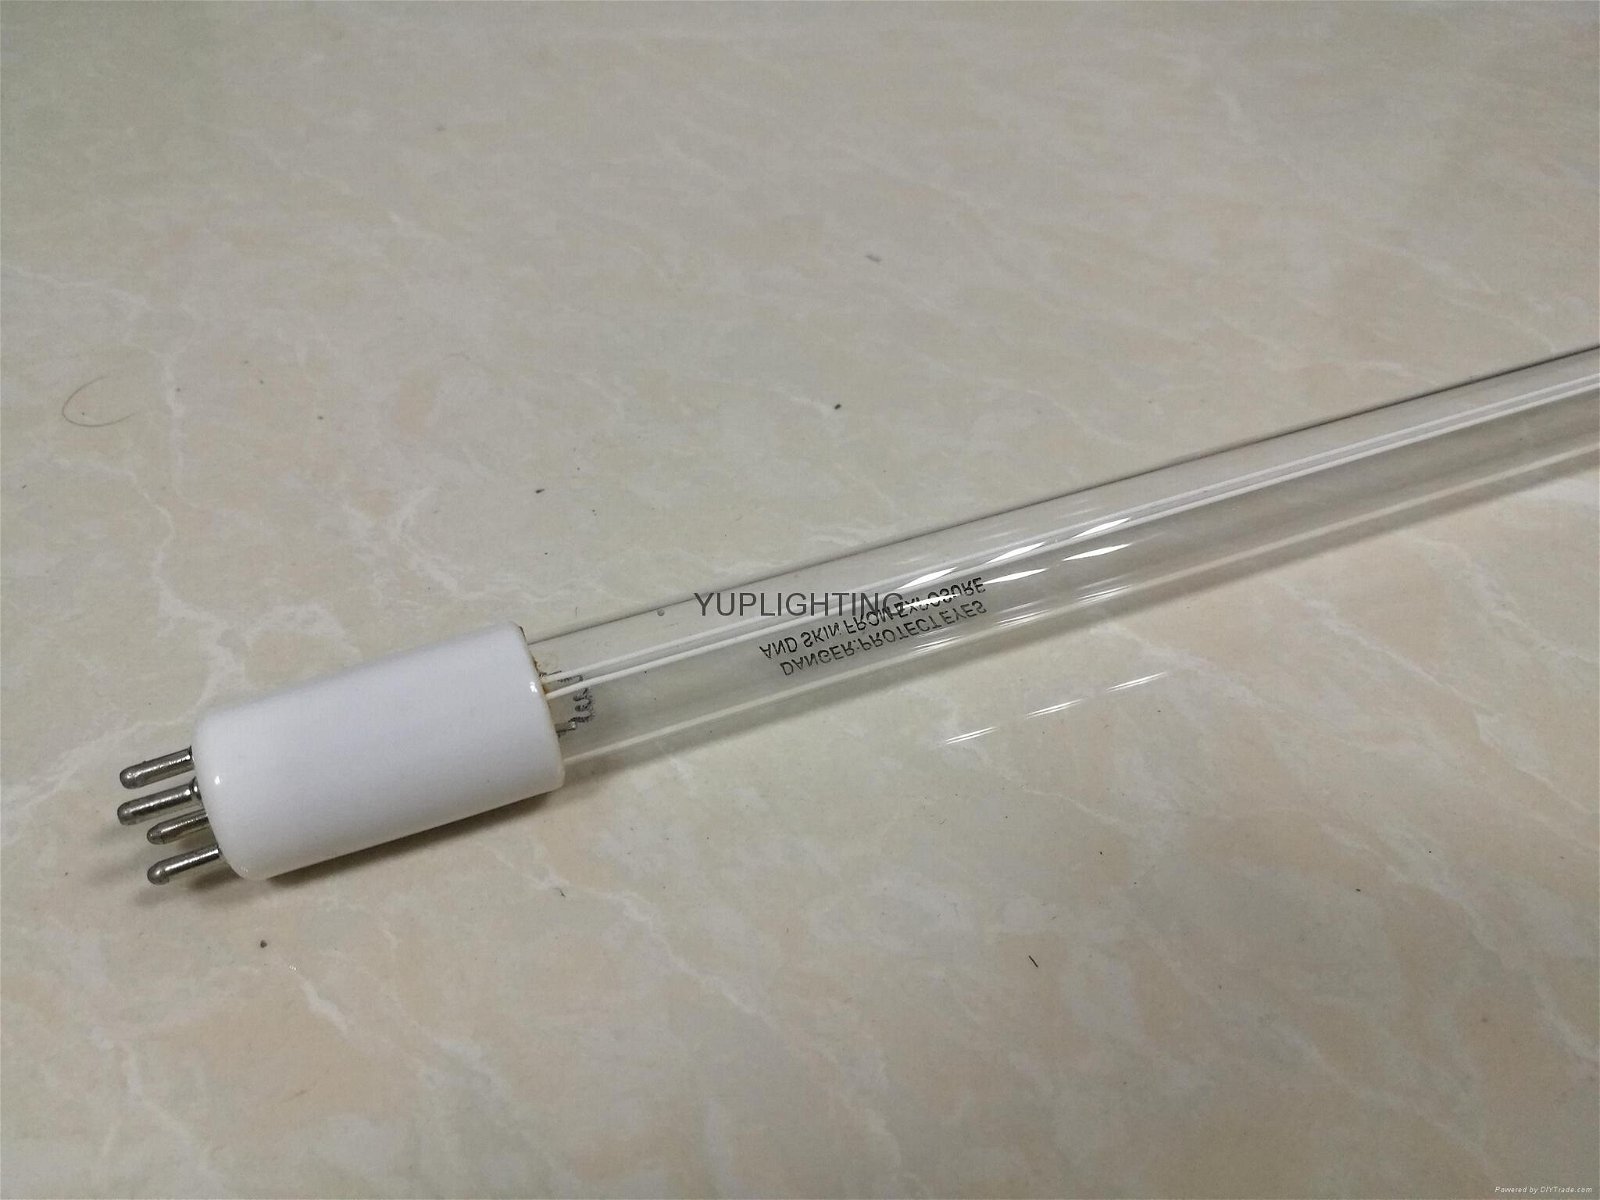 Replacement UV lamp for Sanuvox LMPHGS240